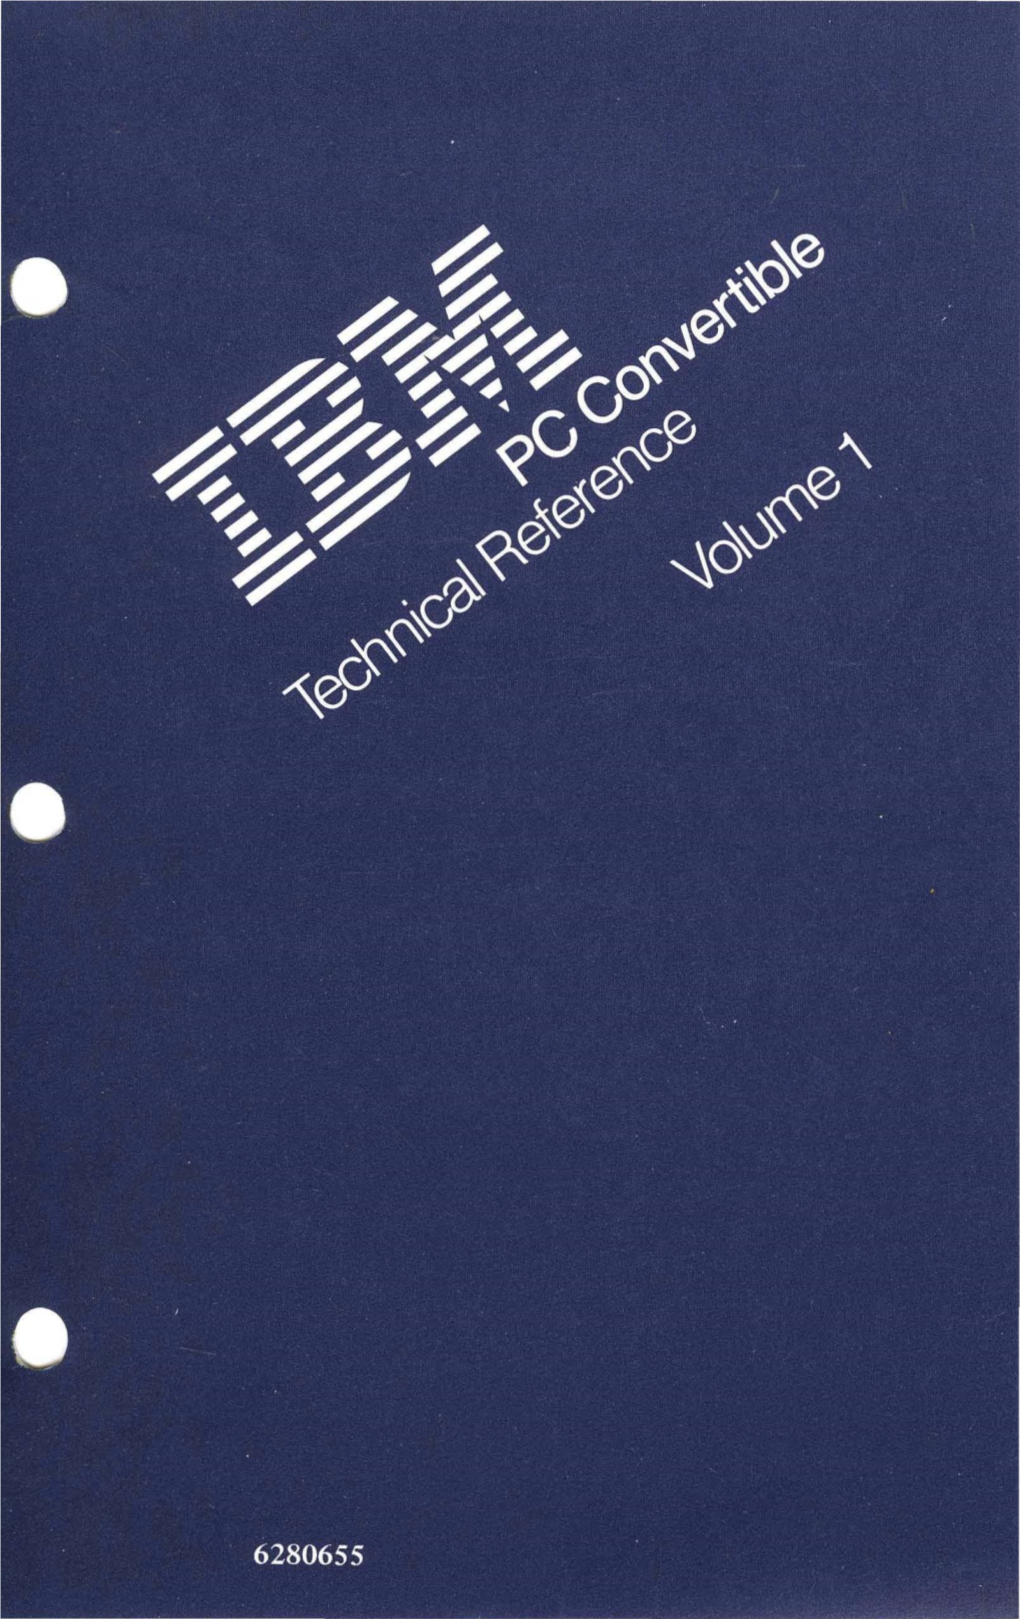 6280655 PC Convertable Technical Reference Volume 1 Feb86